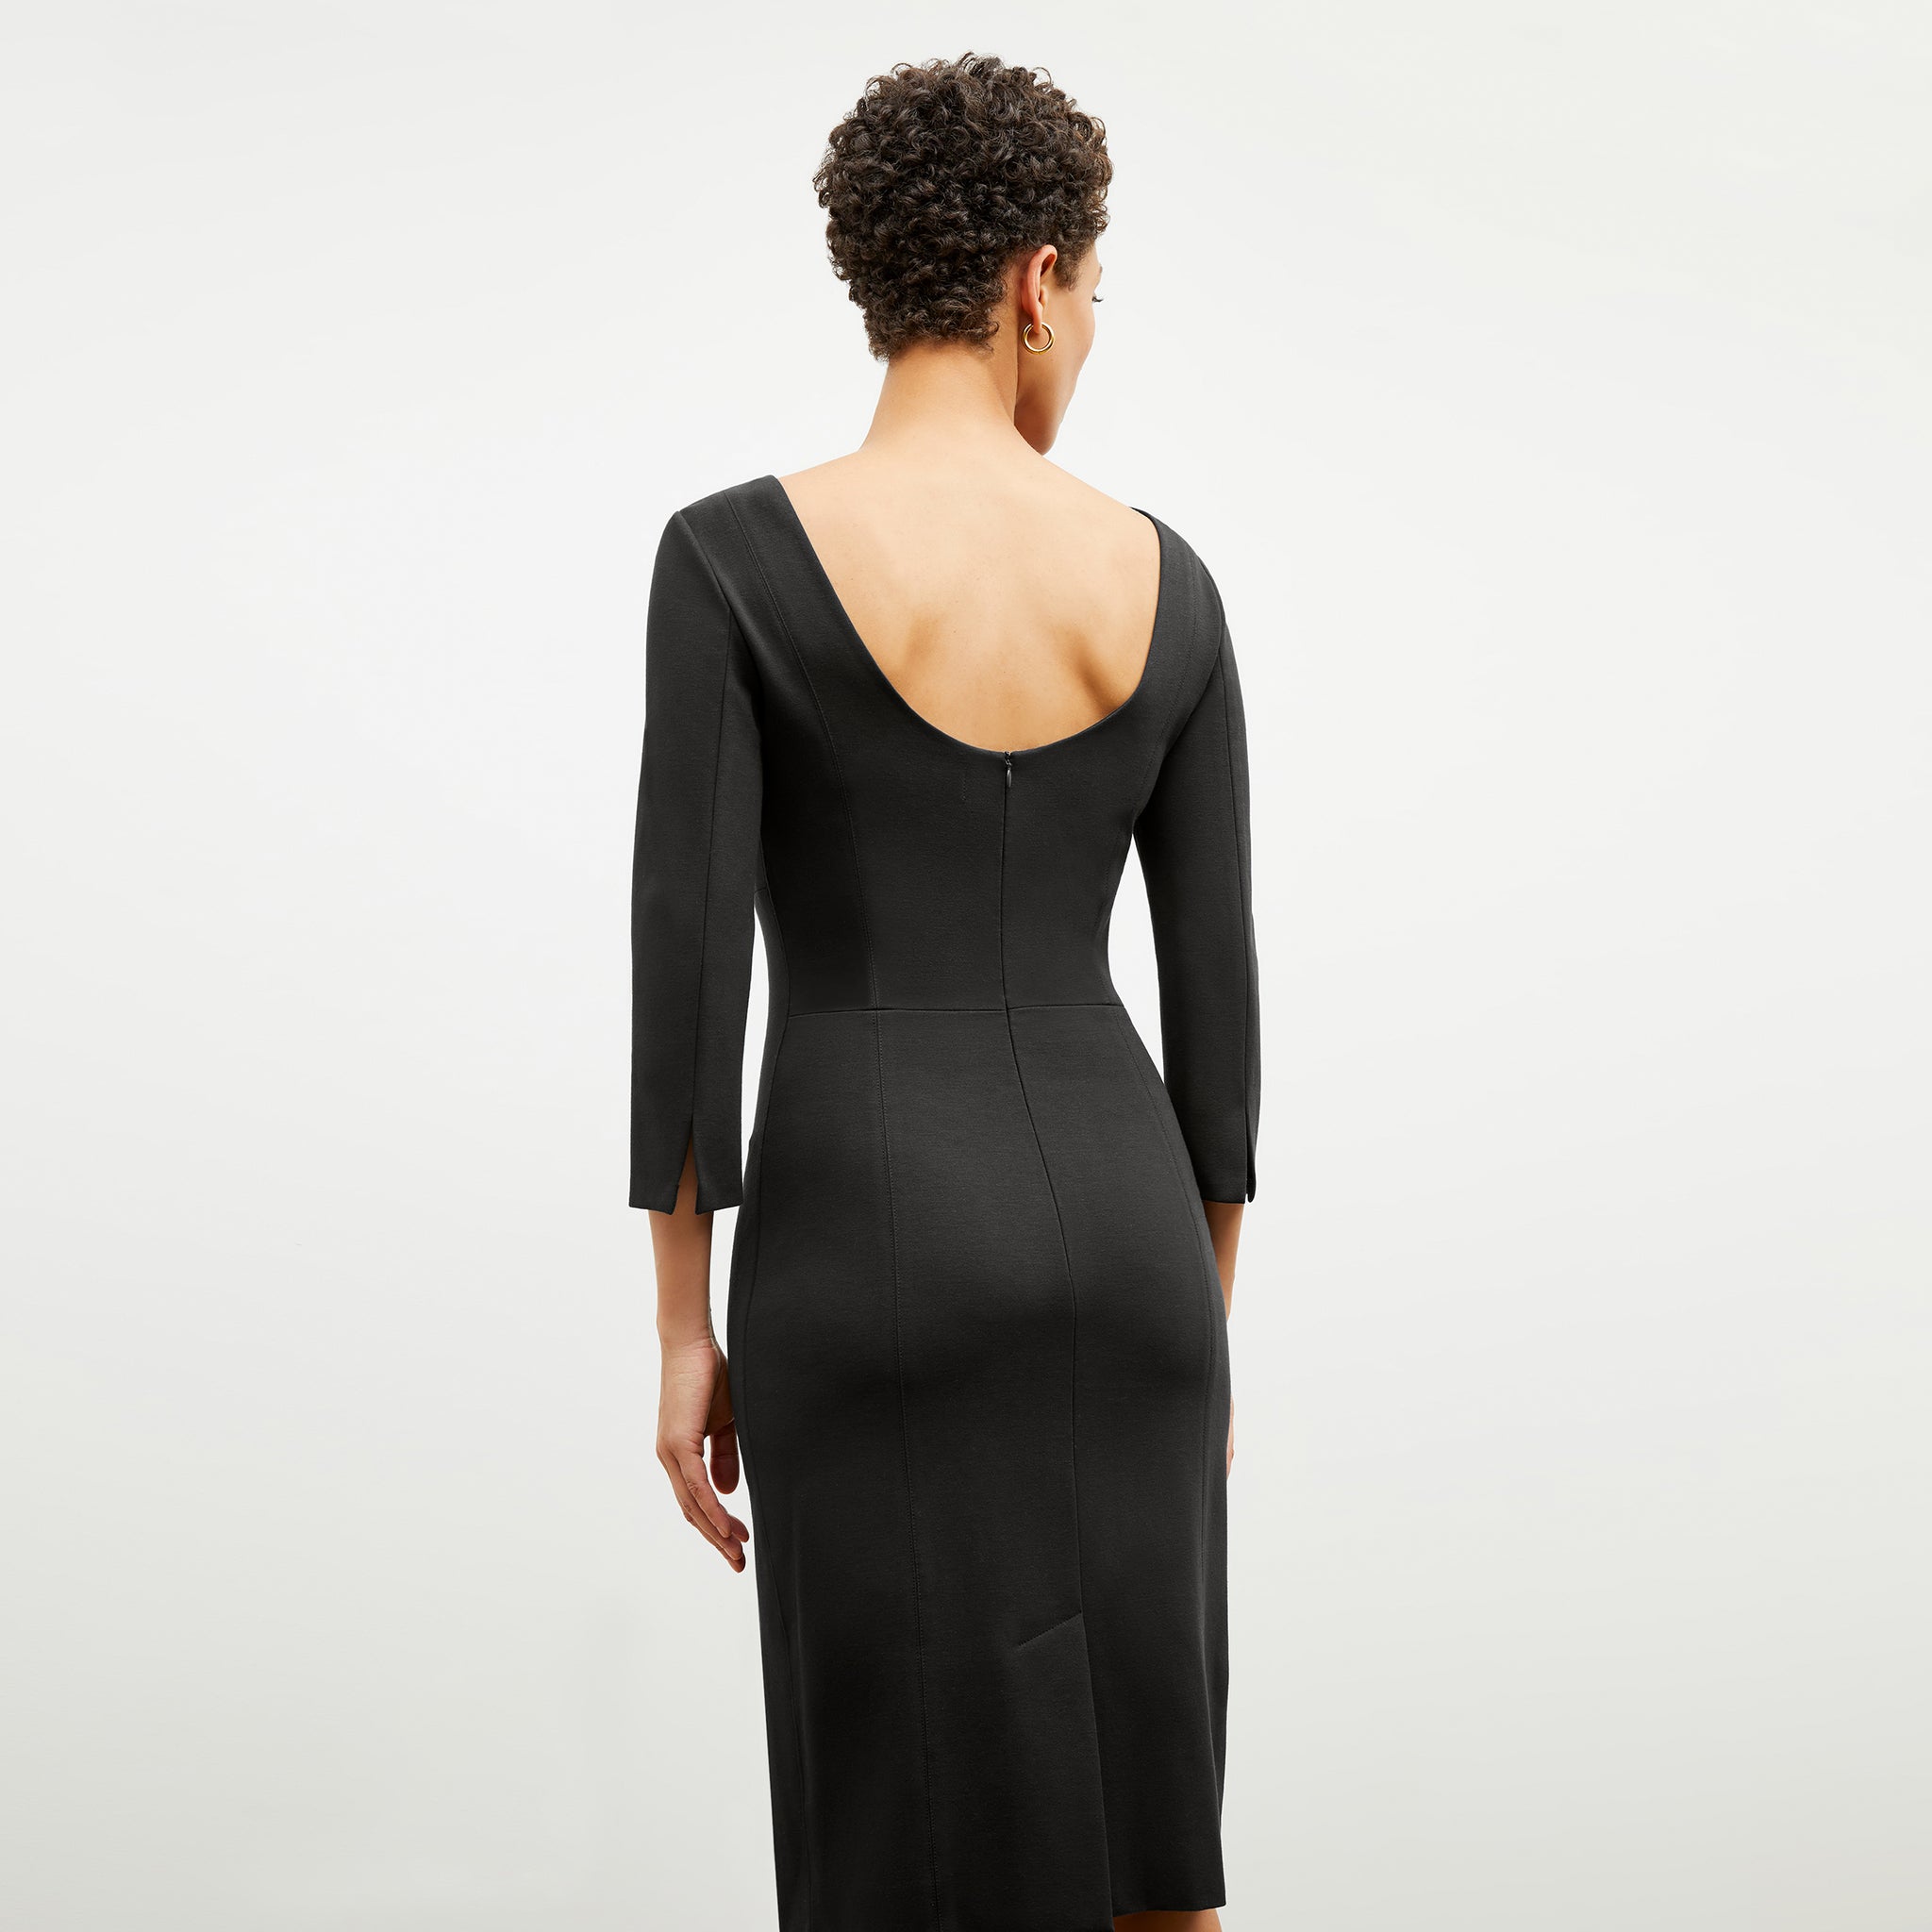 Back image of a woman wearing the winston dress in black 